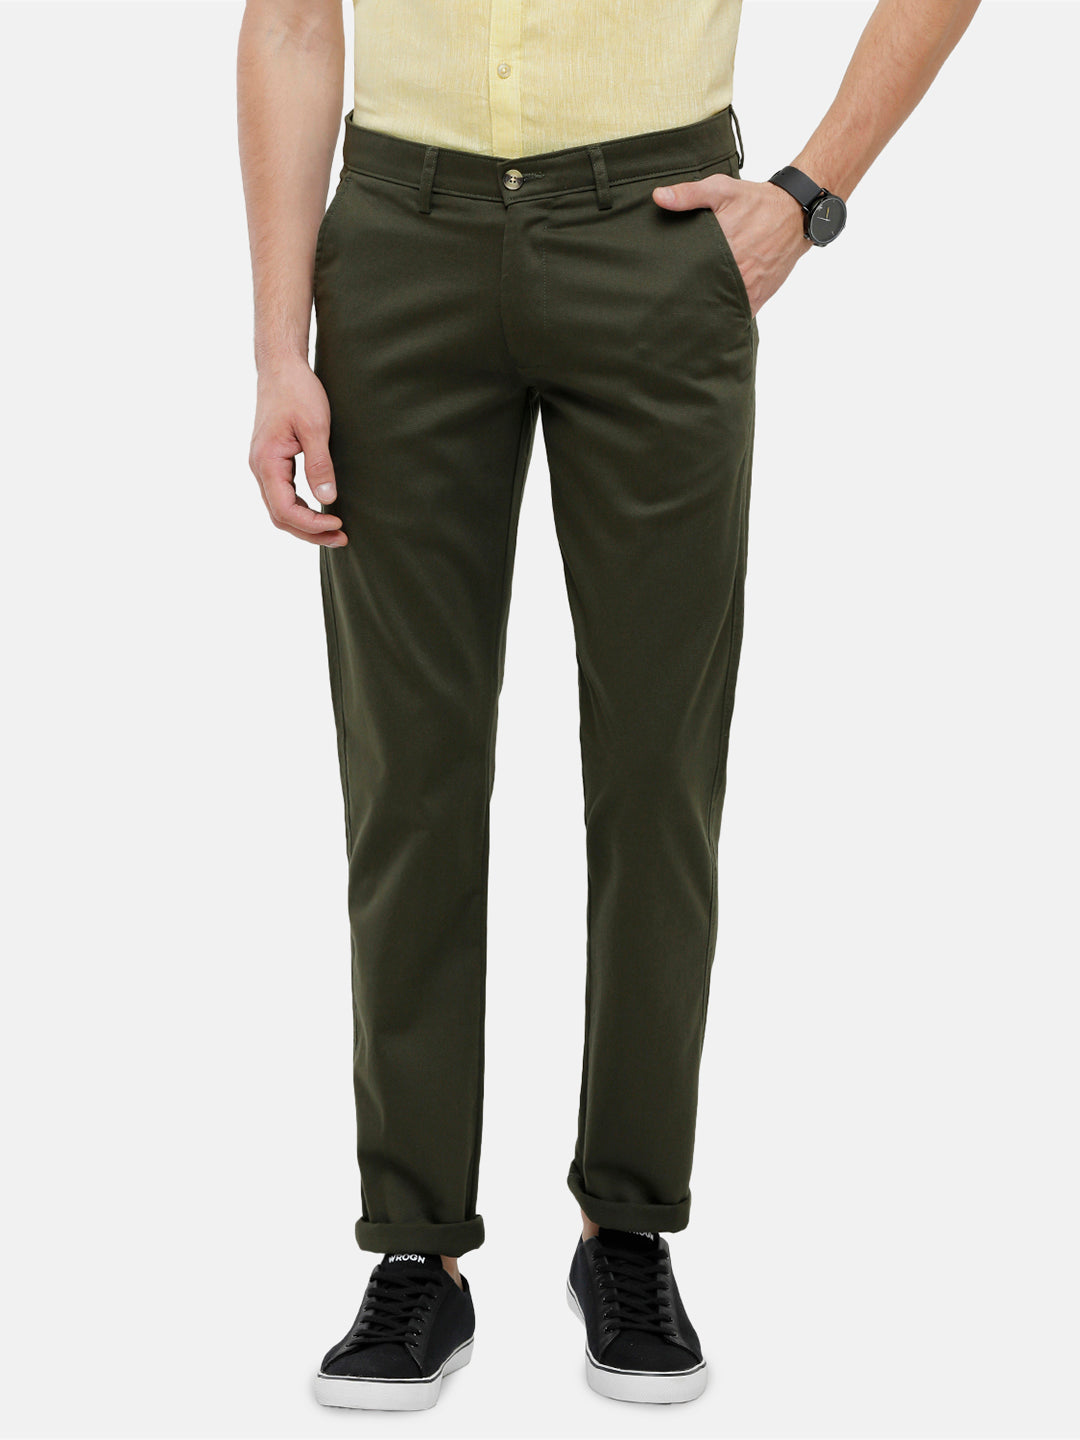 Classic Polo Mens Solid Slim Fit Green Trousers - Eros Olive